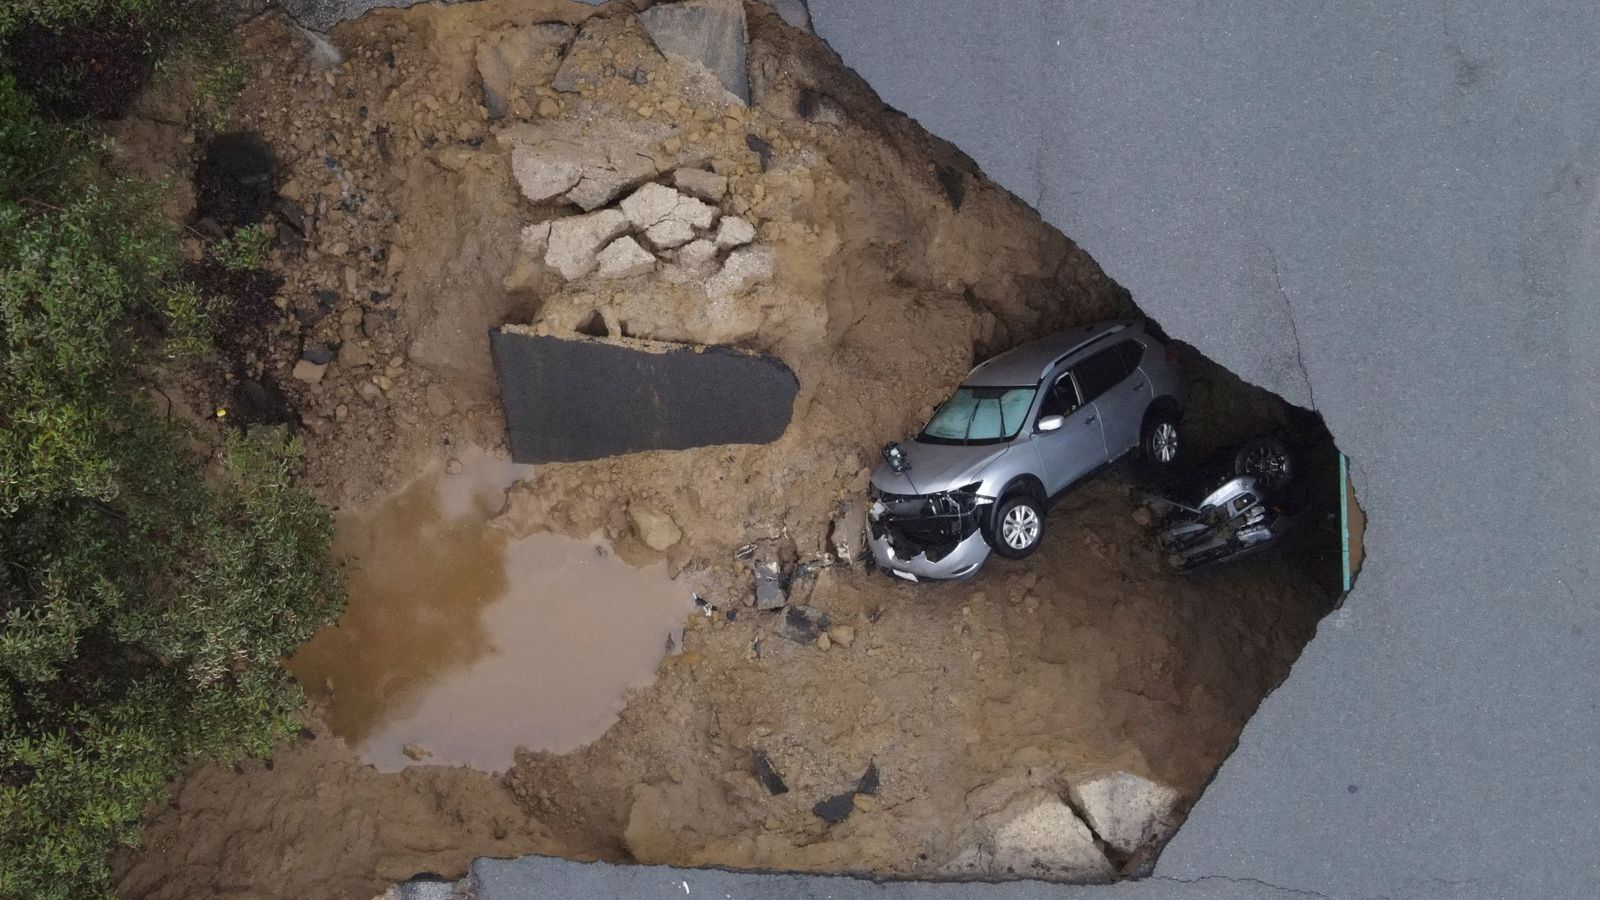 Sinkholes swallow cars as torrential rain batters California - and another powerful storm is coming